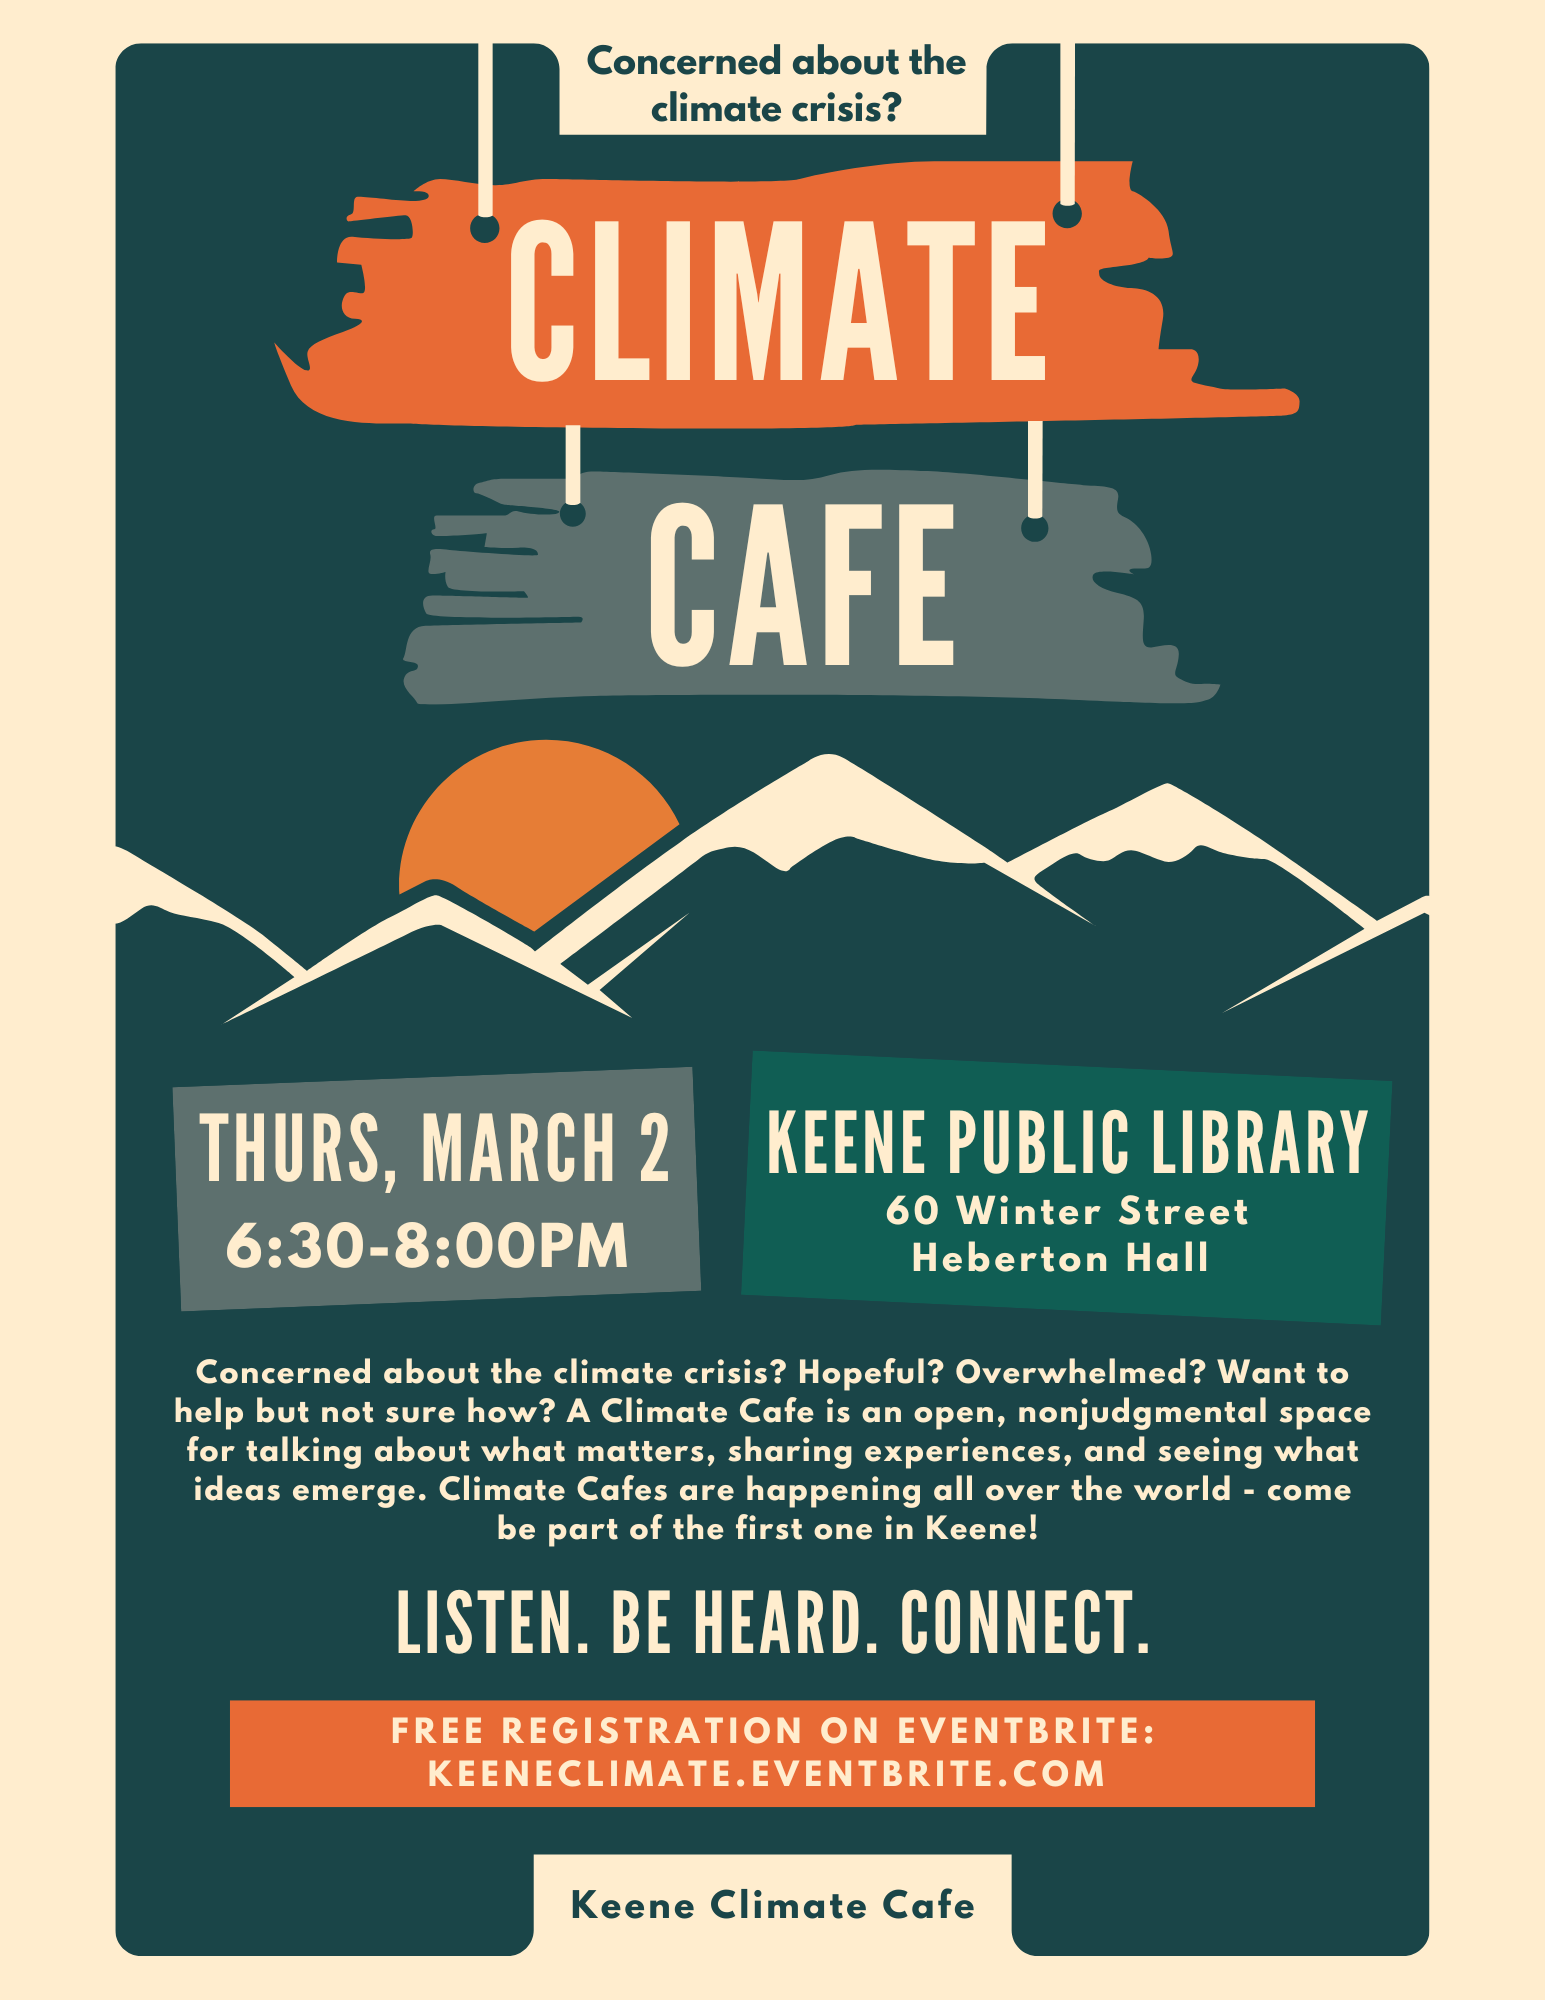 Climate Cafe event information